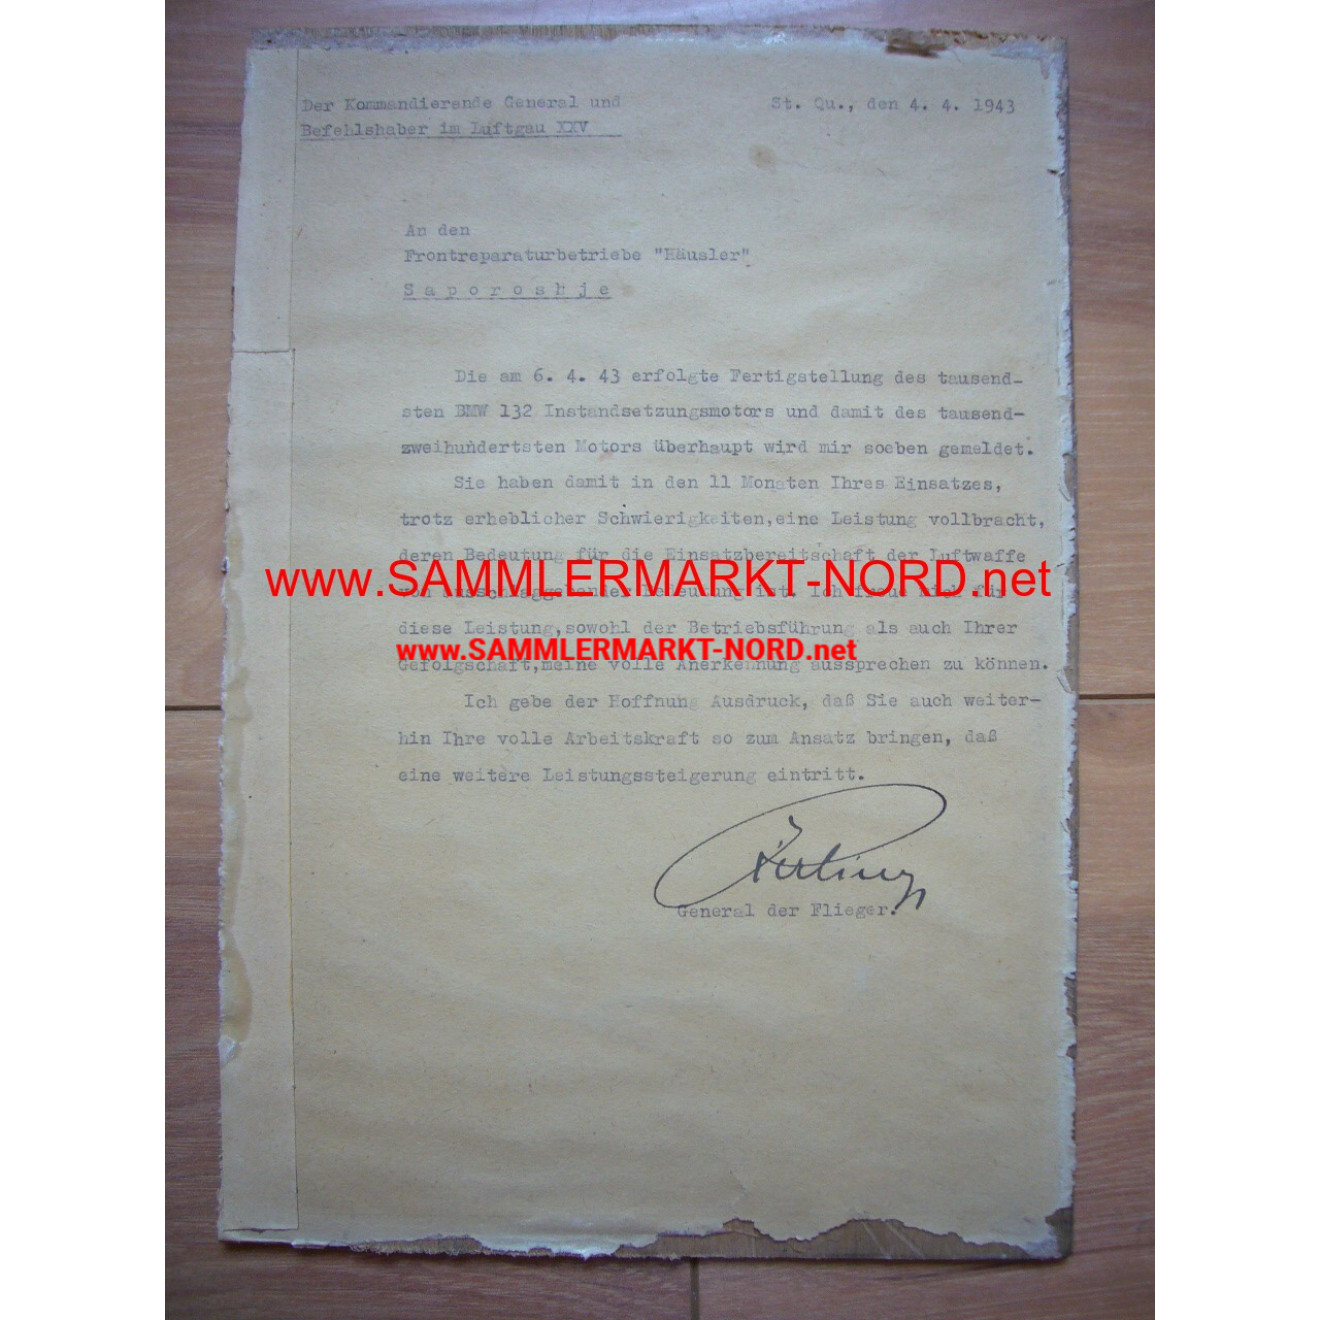 Luftwaffe - Certificate of Appreciation for a front repairer bus